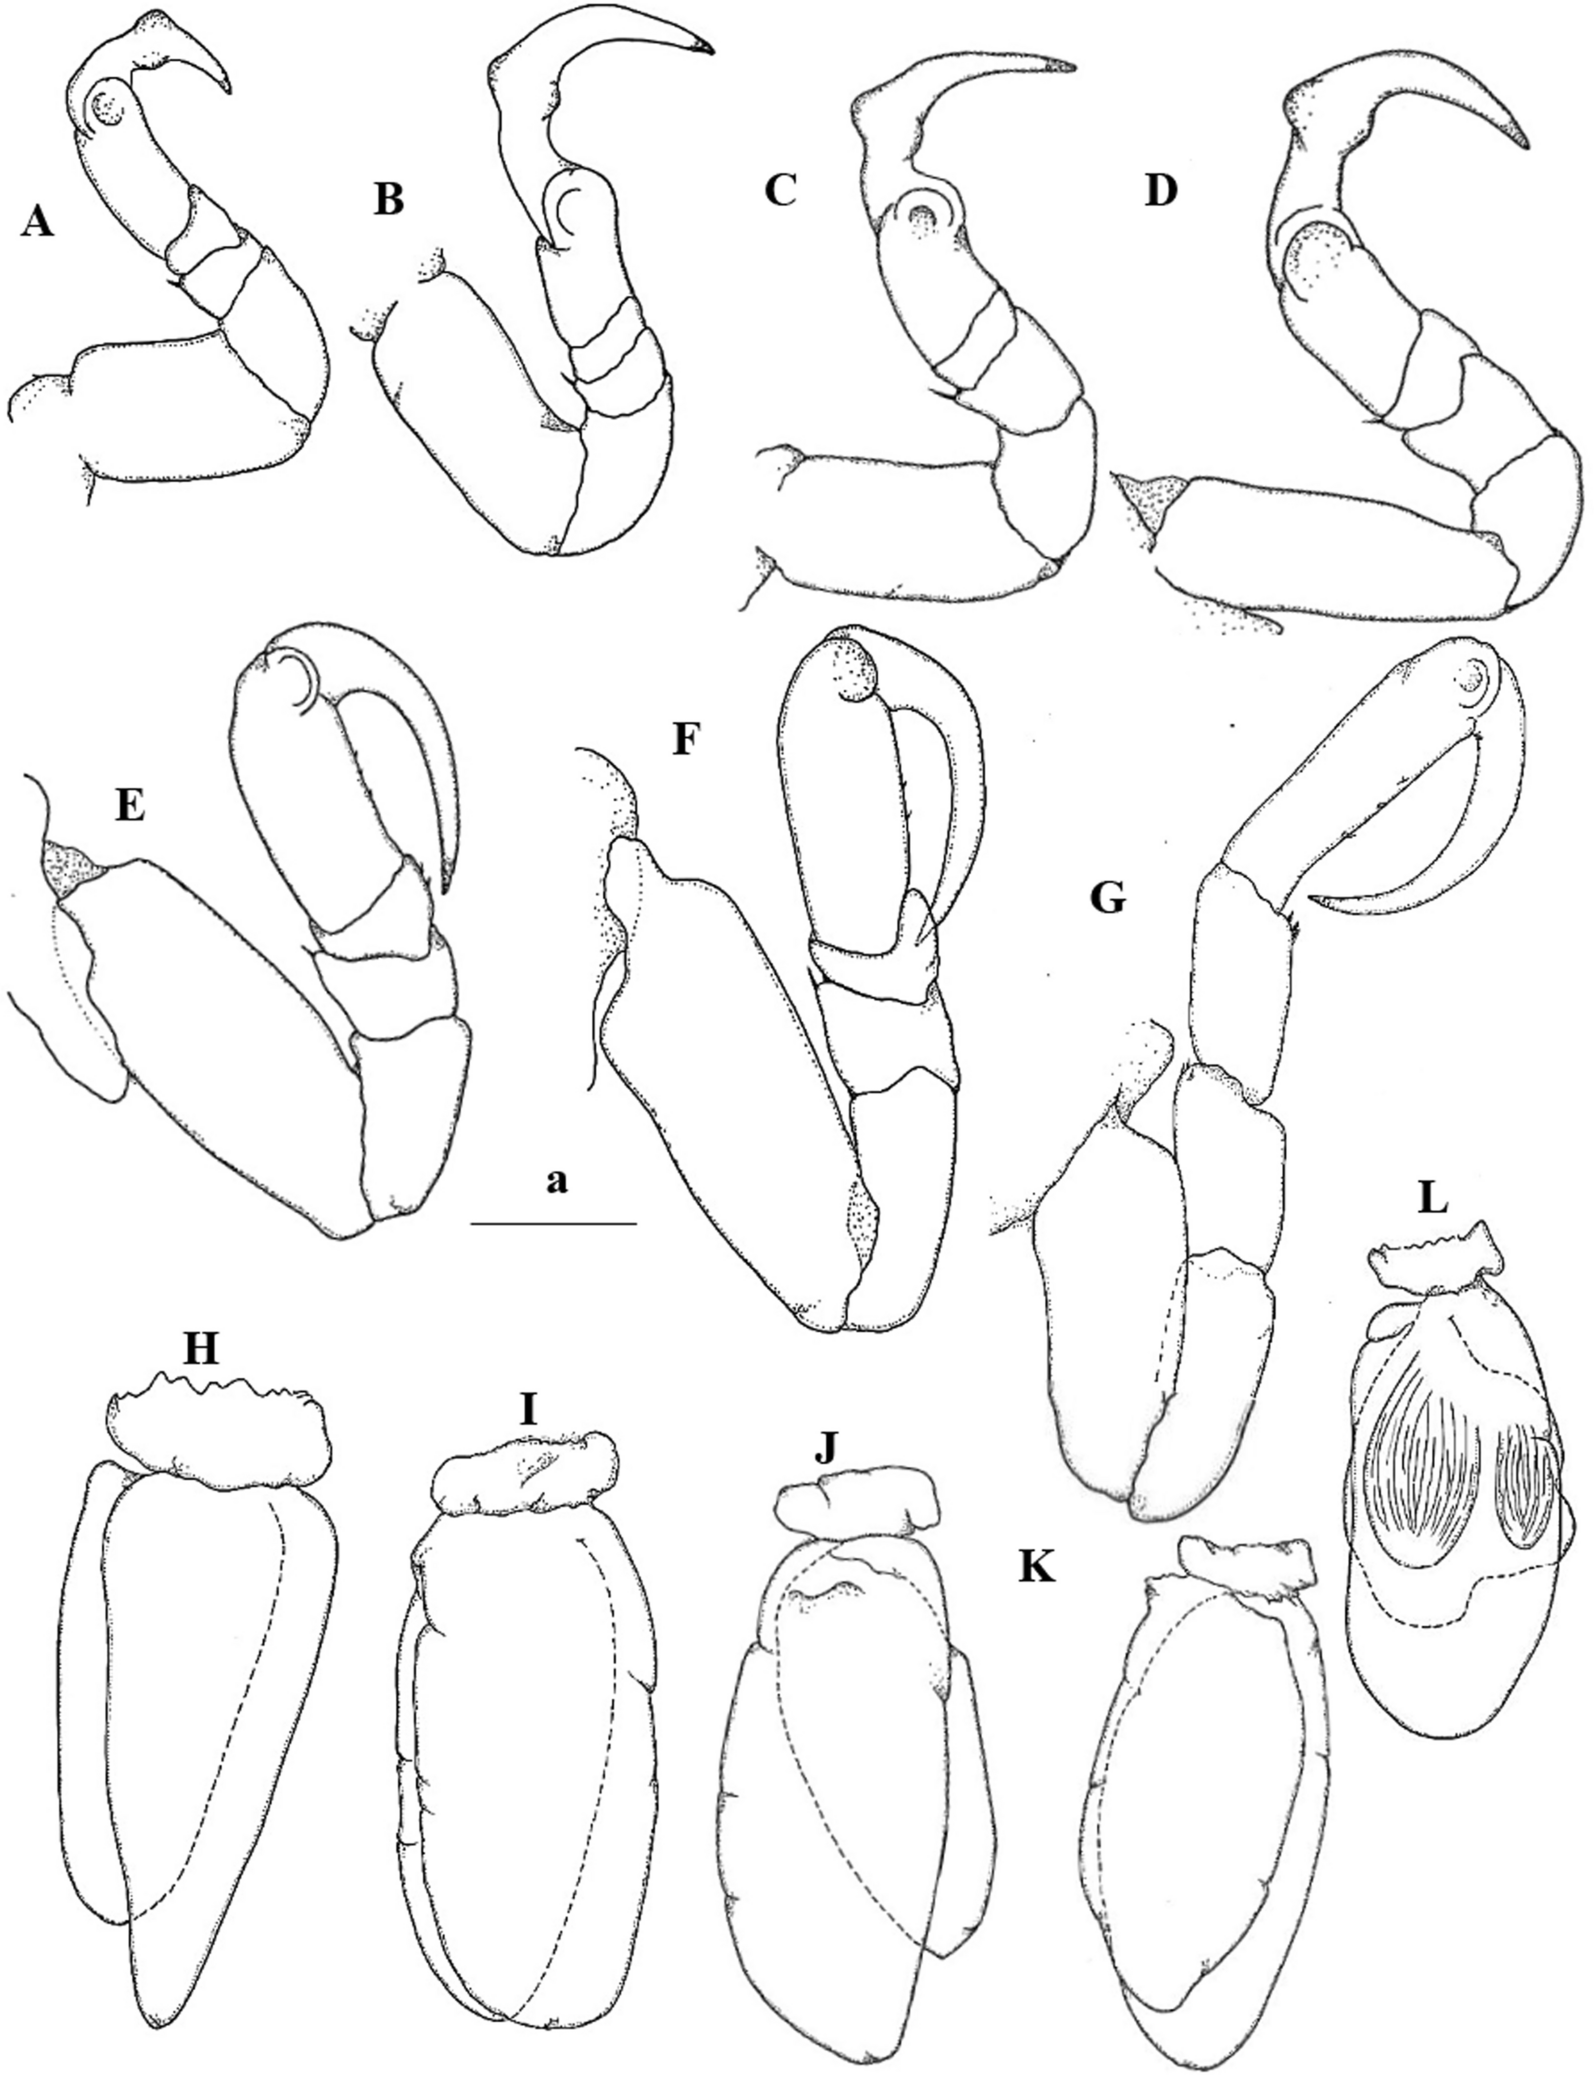 Fig. 9